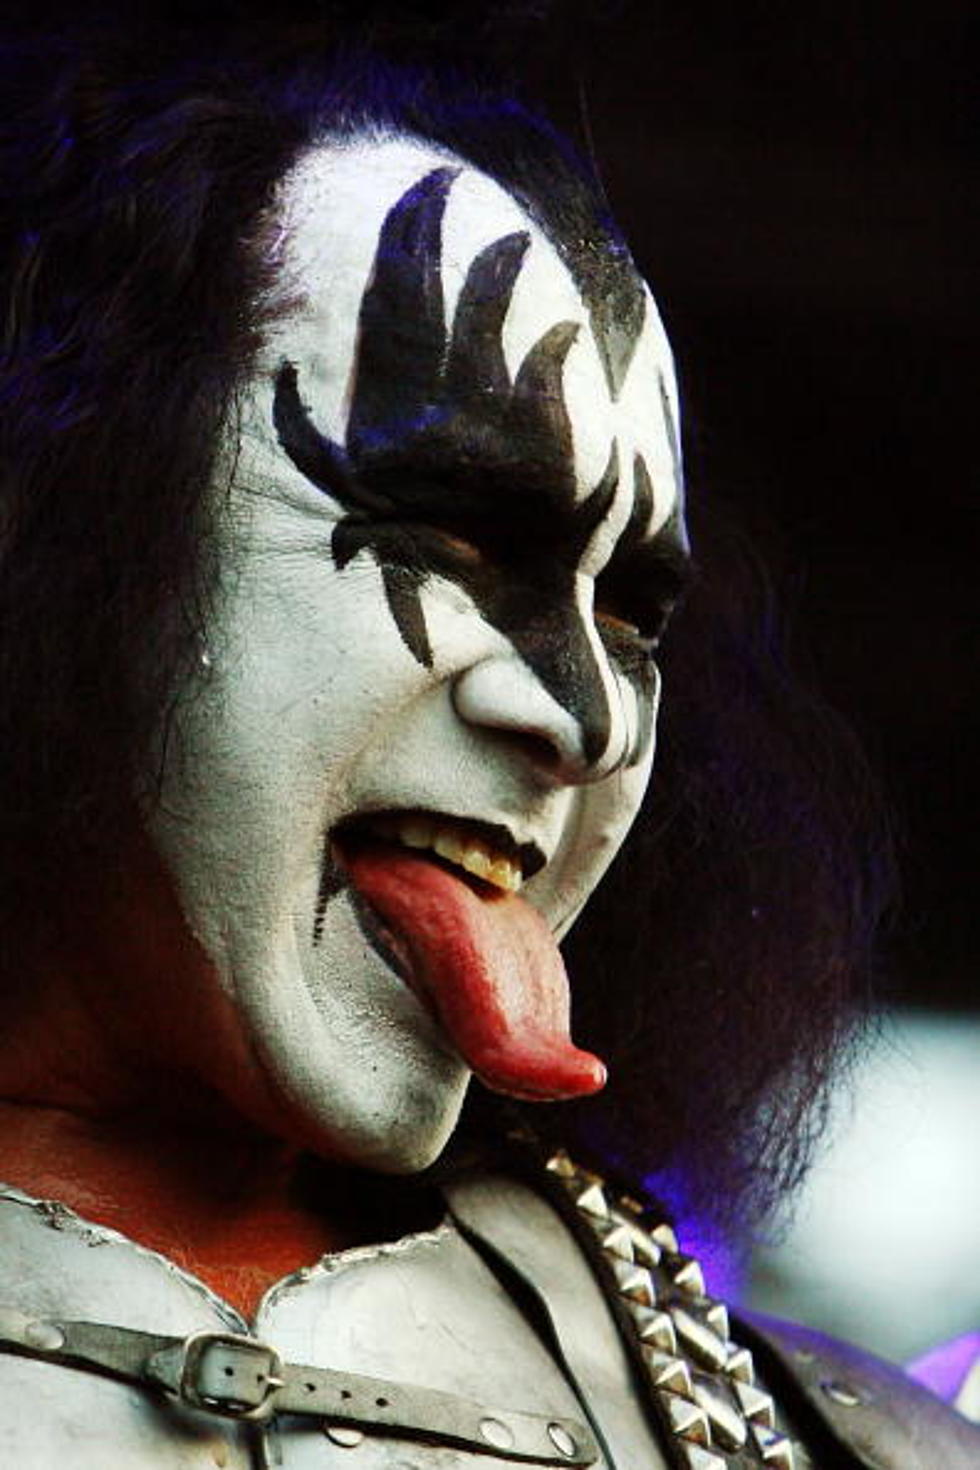 Girl Seeks New Record For 'World's Longest Tongue', Gene Simmons Hangs His  Head in Shame